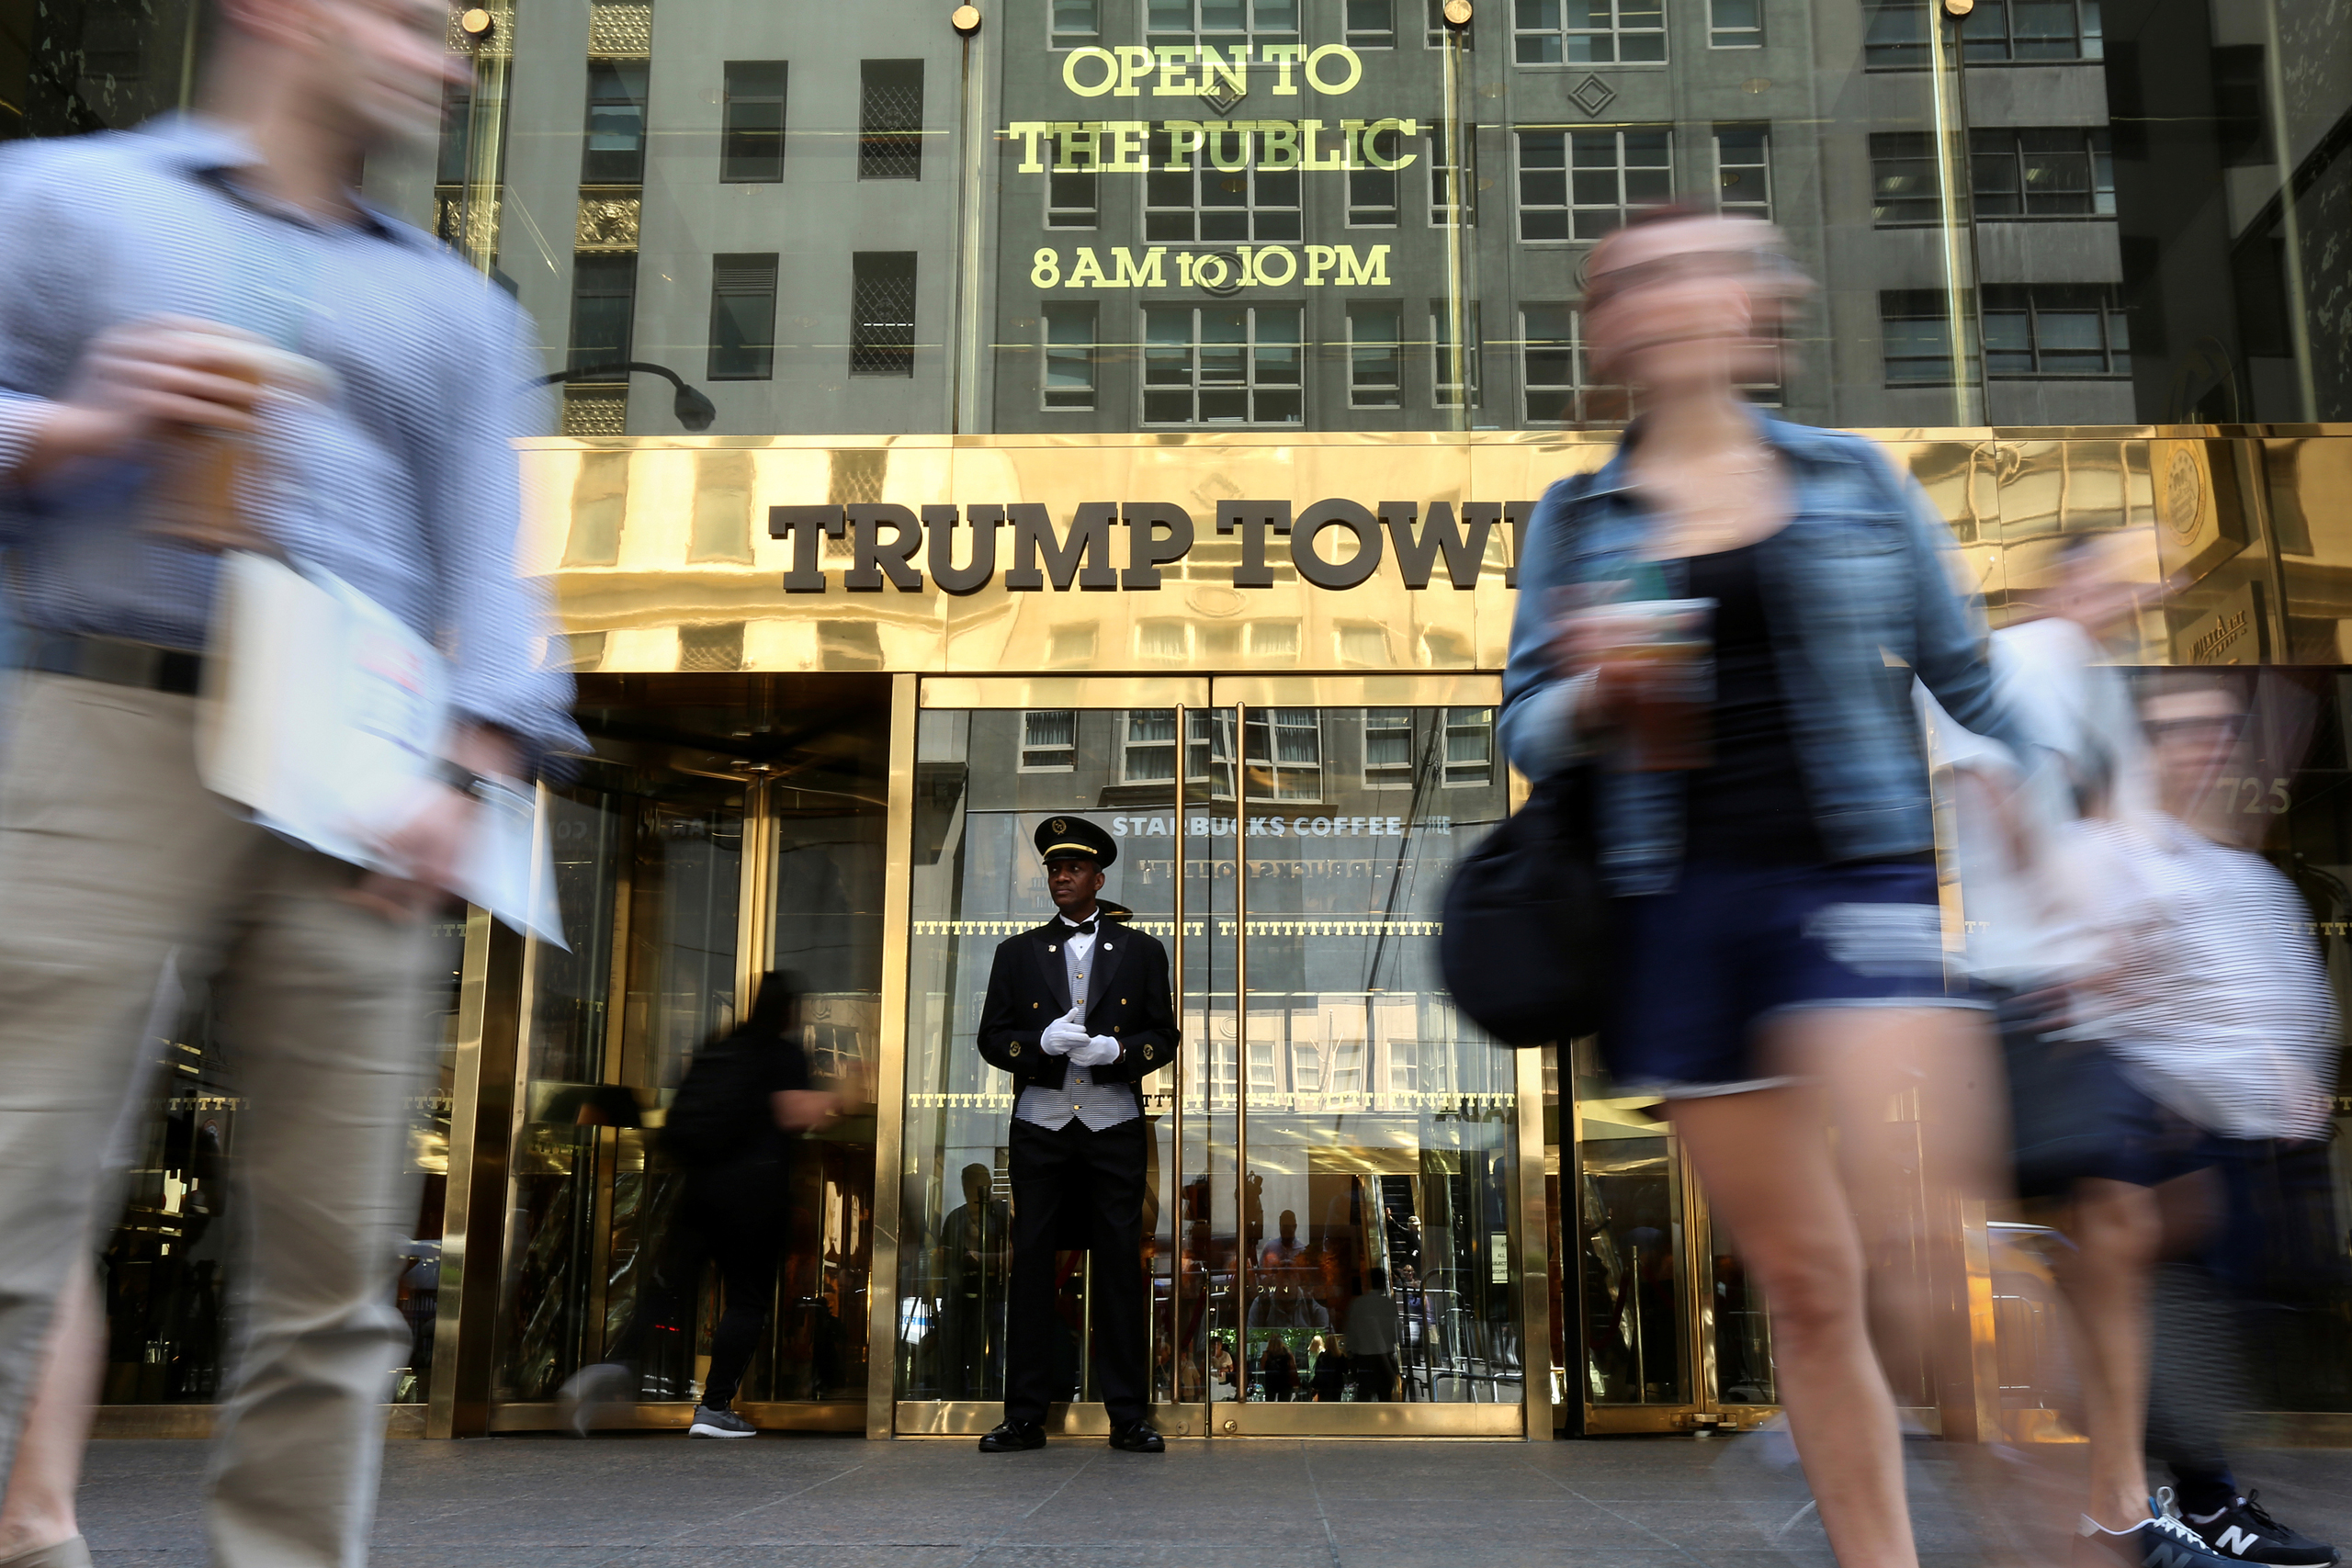 People walk past the Trump Tower in New York on May 23, 2016. (Carlo Allegri—Reuters)